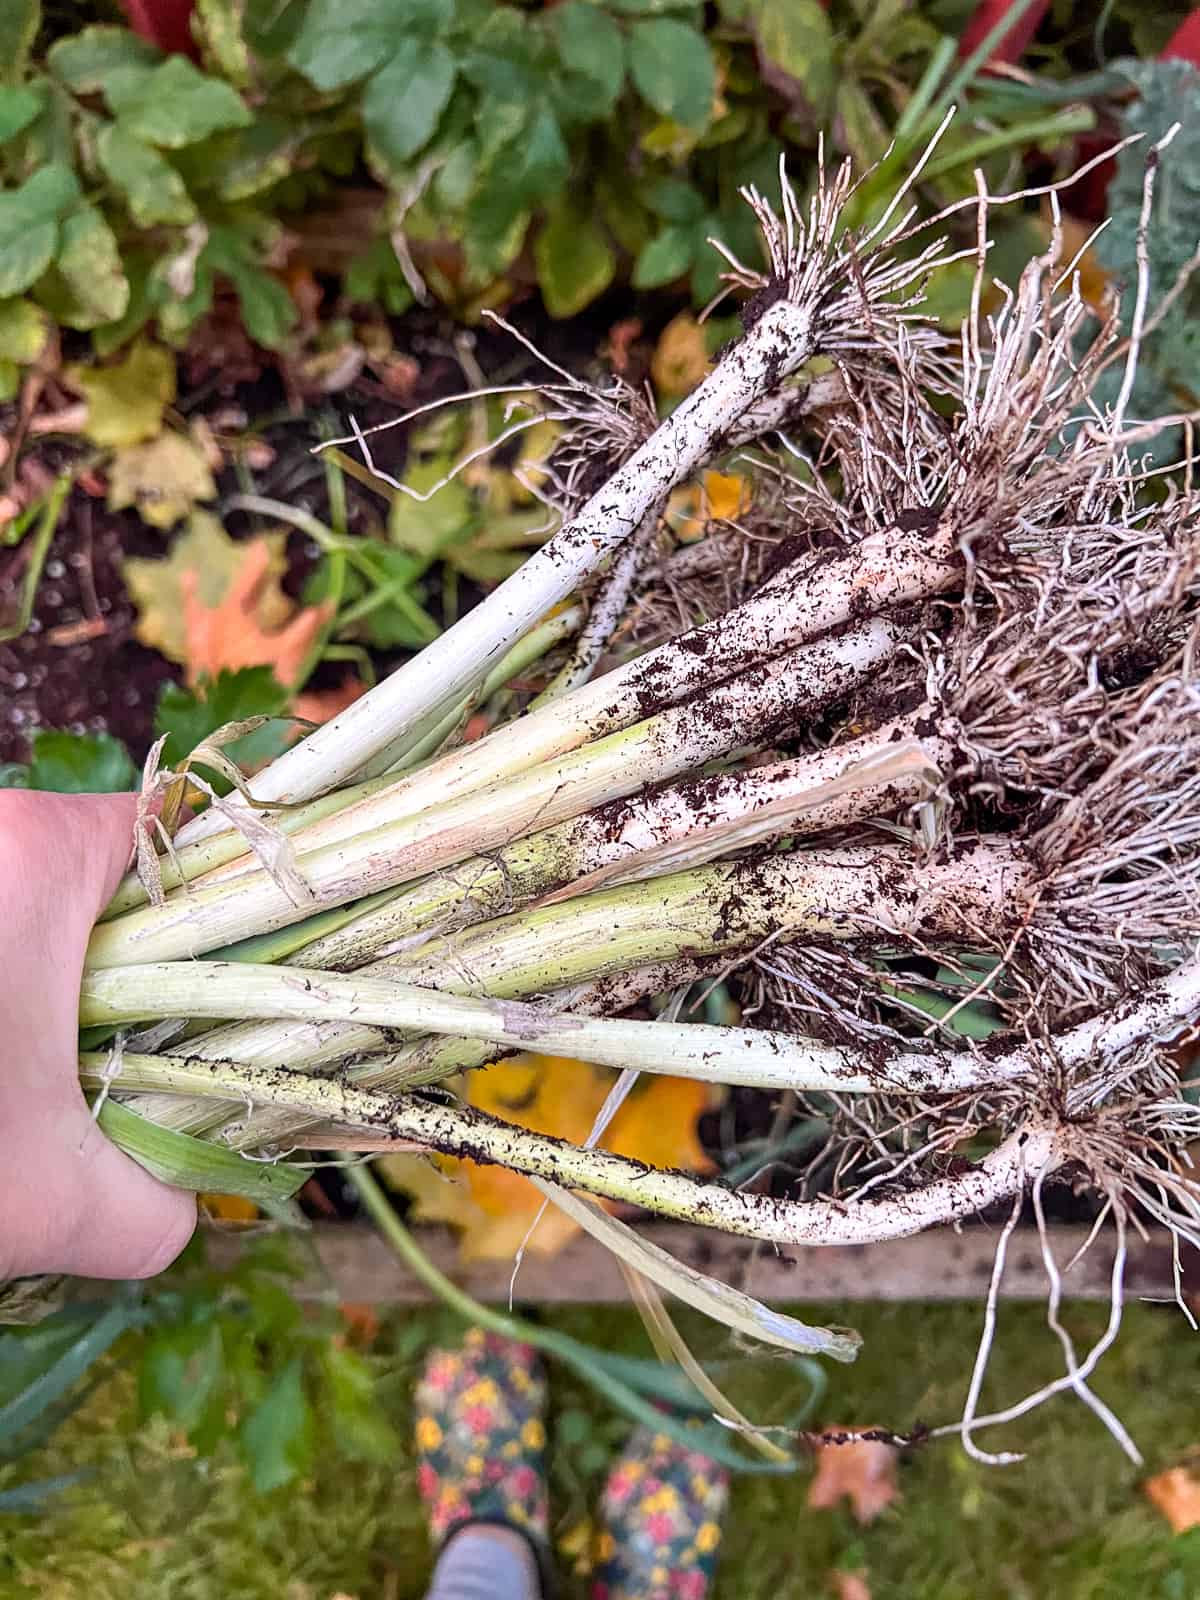 An image of a bunch of leeks pulled out from a raised bed during seasonal garden maintenance.